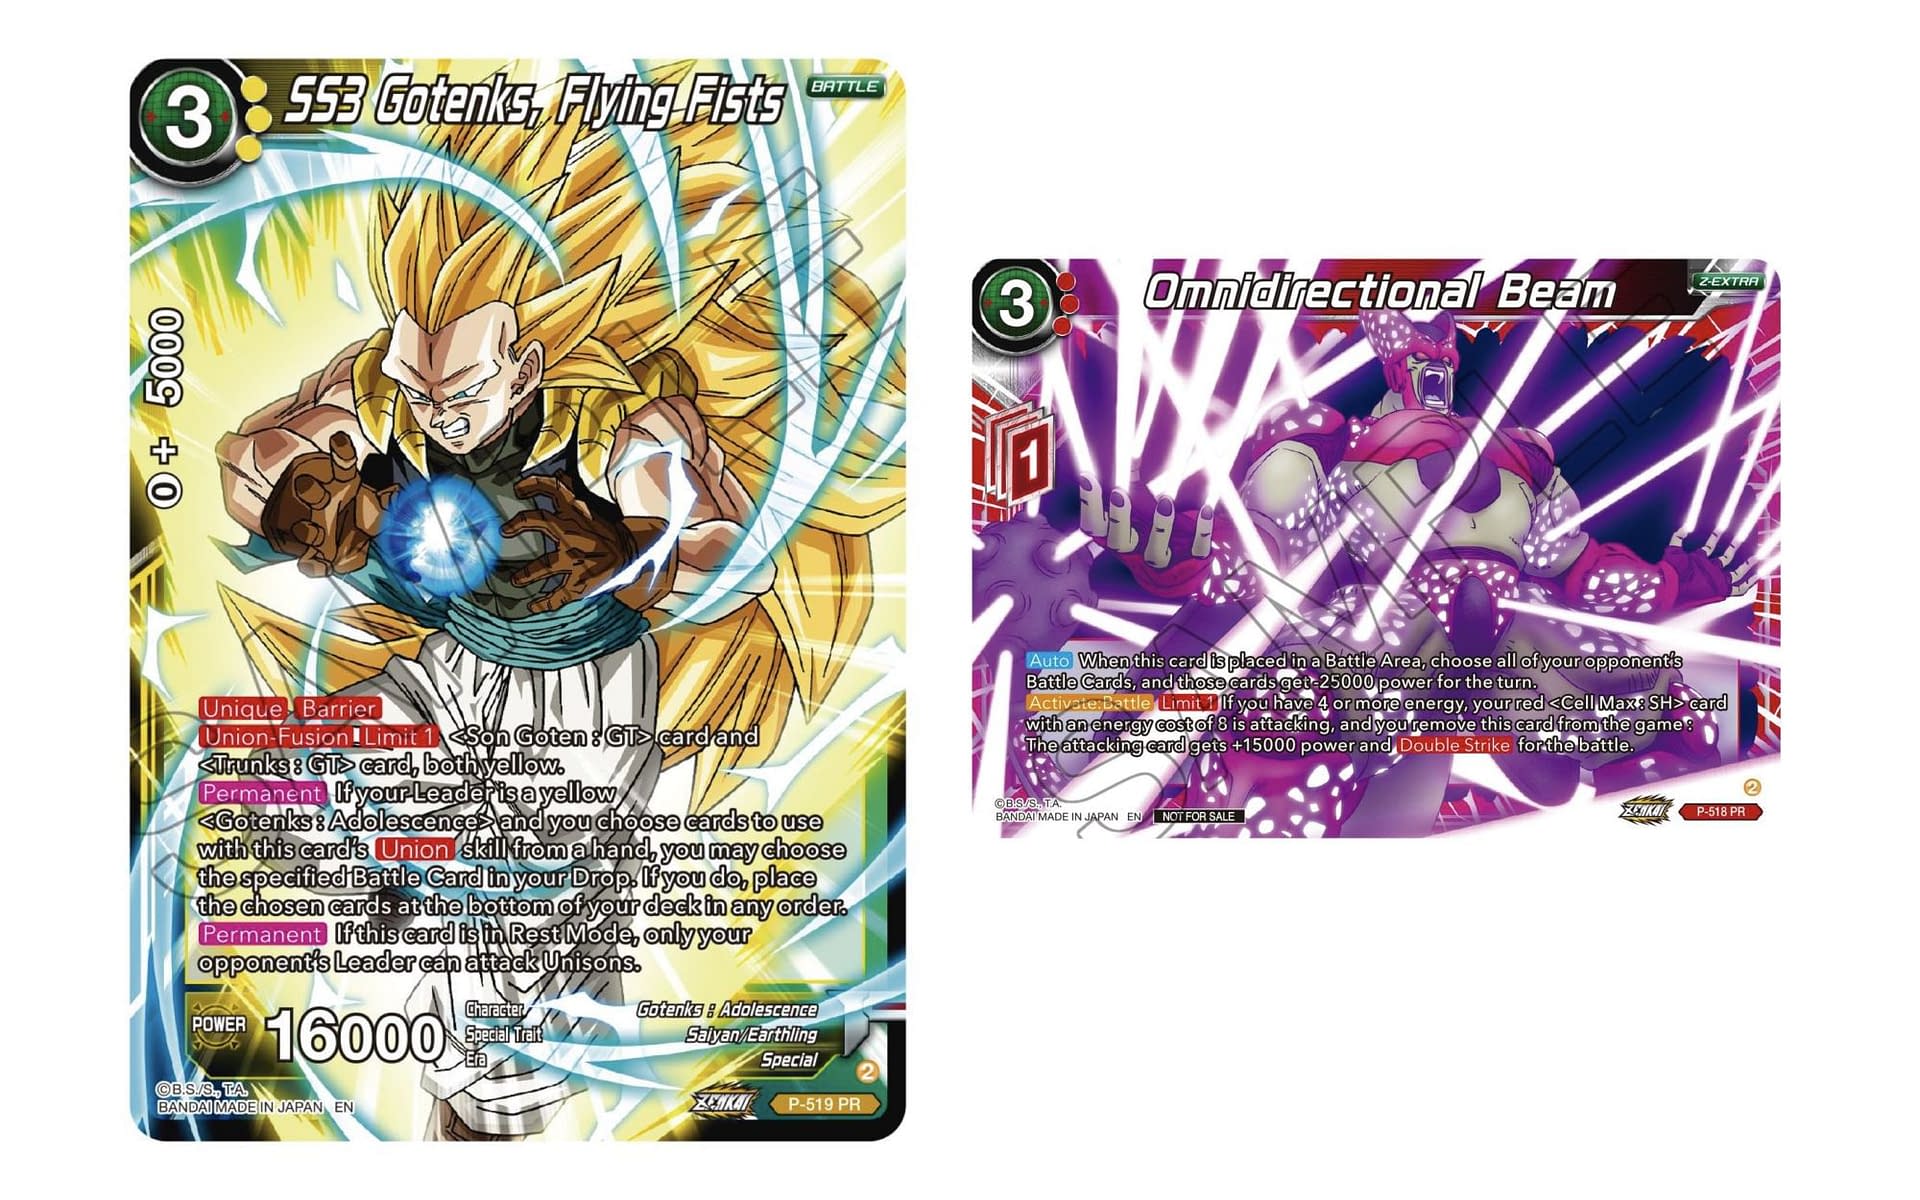 DRAGON BALL SUPER CARD GAME Is Moving to the Next Level!]